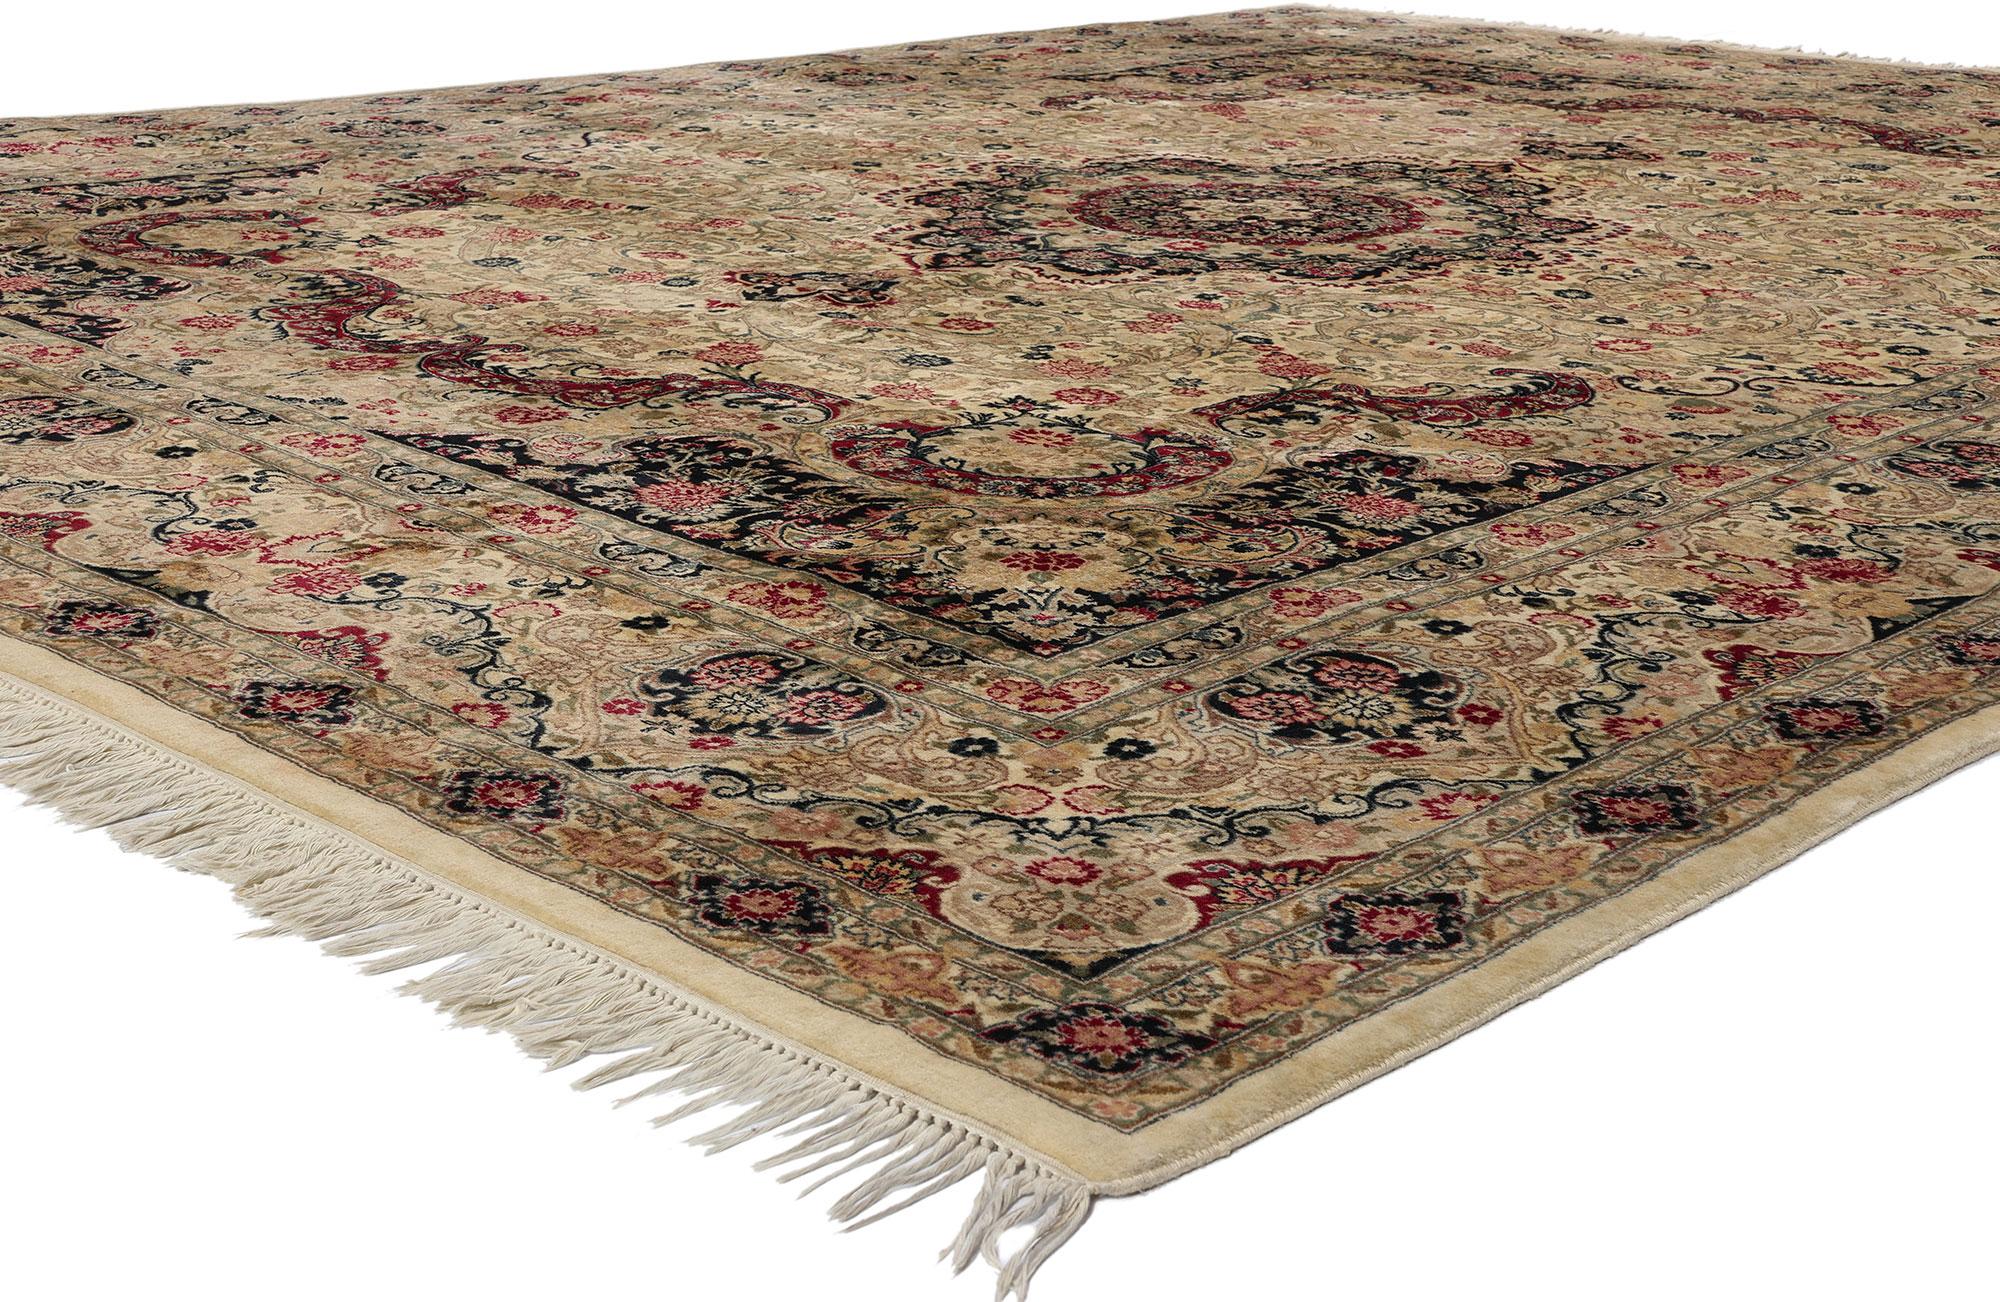 78688 Vintage French Savonnerie Style Rug, 09'02 x 12'00. This hand-knotted wool vintage Pakistani Savonnerie style rug is a testament to the fusion of artistic traditions. At its heart lies a cusped floral medallion adorned with a delicate bottony